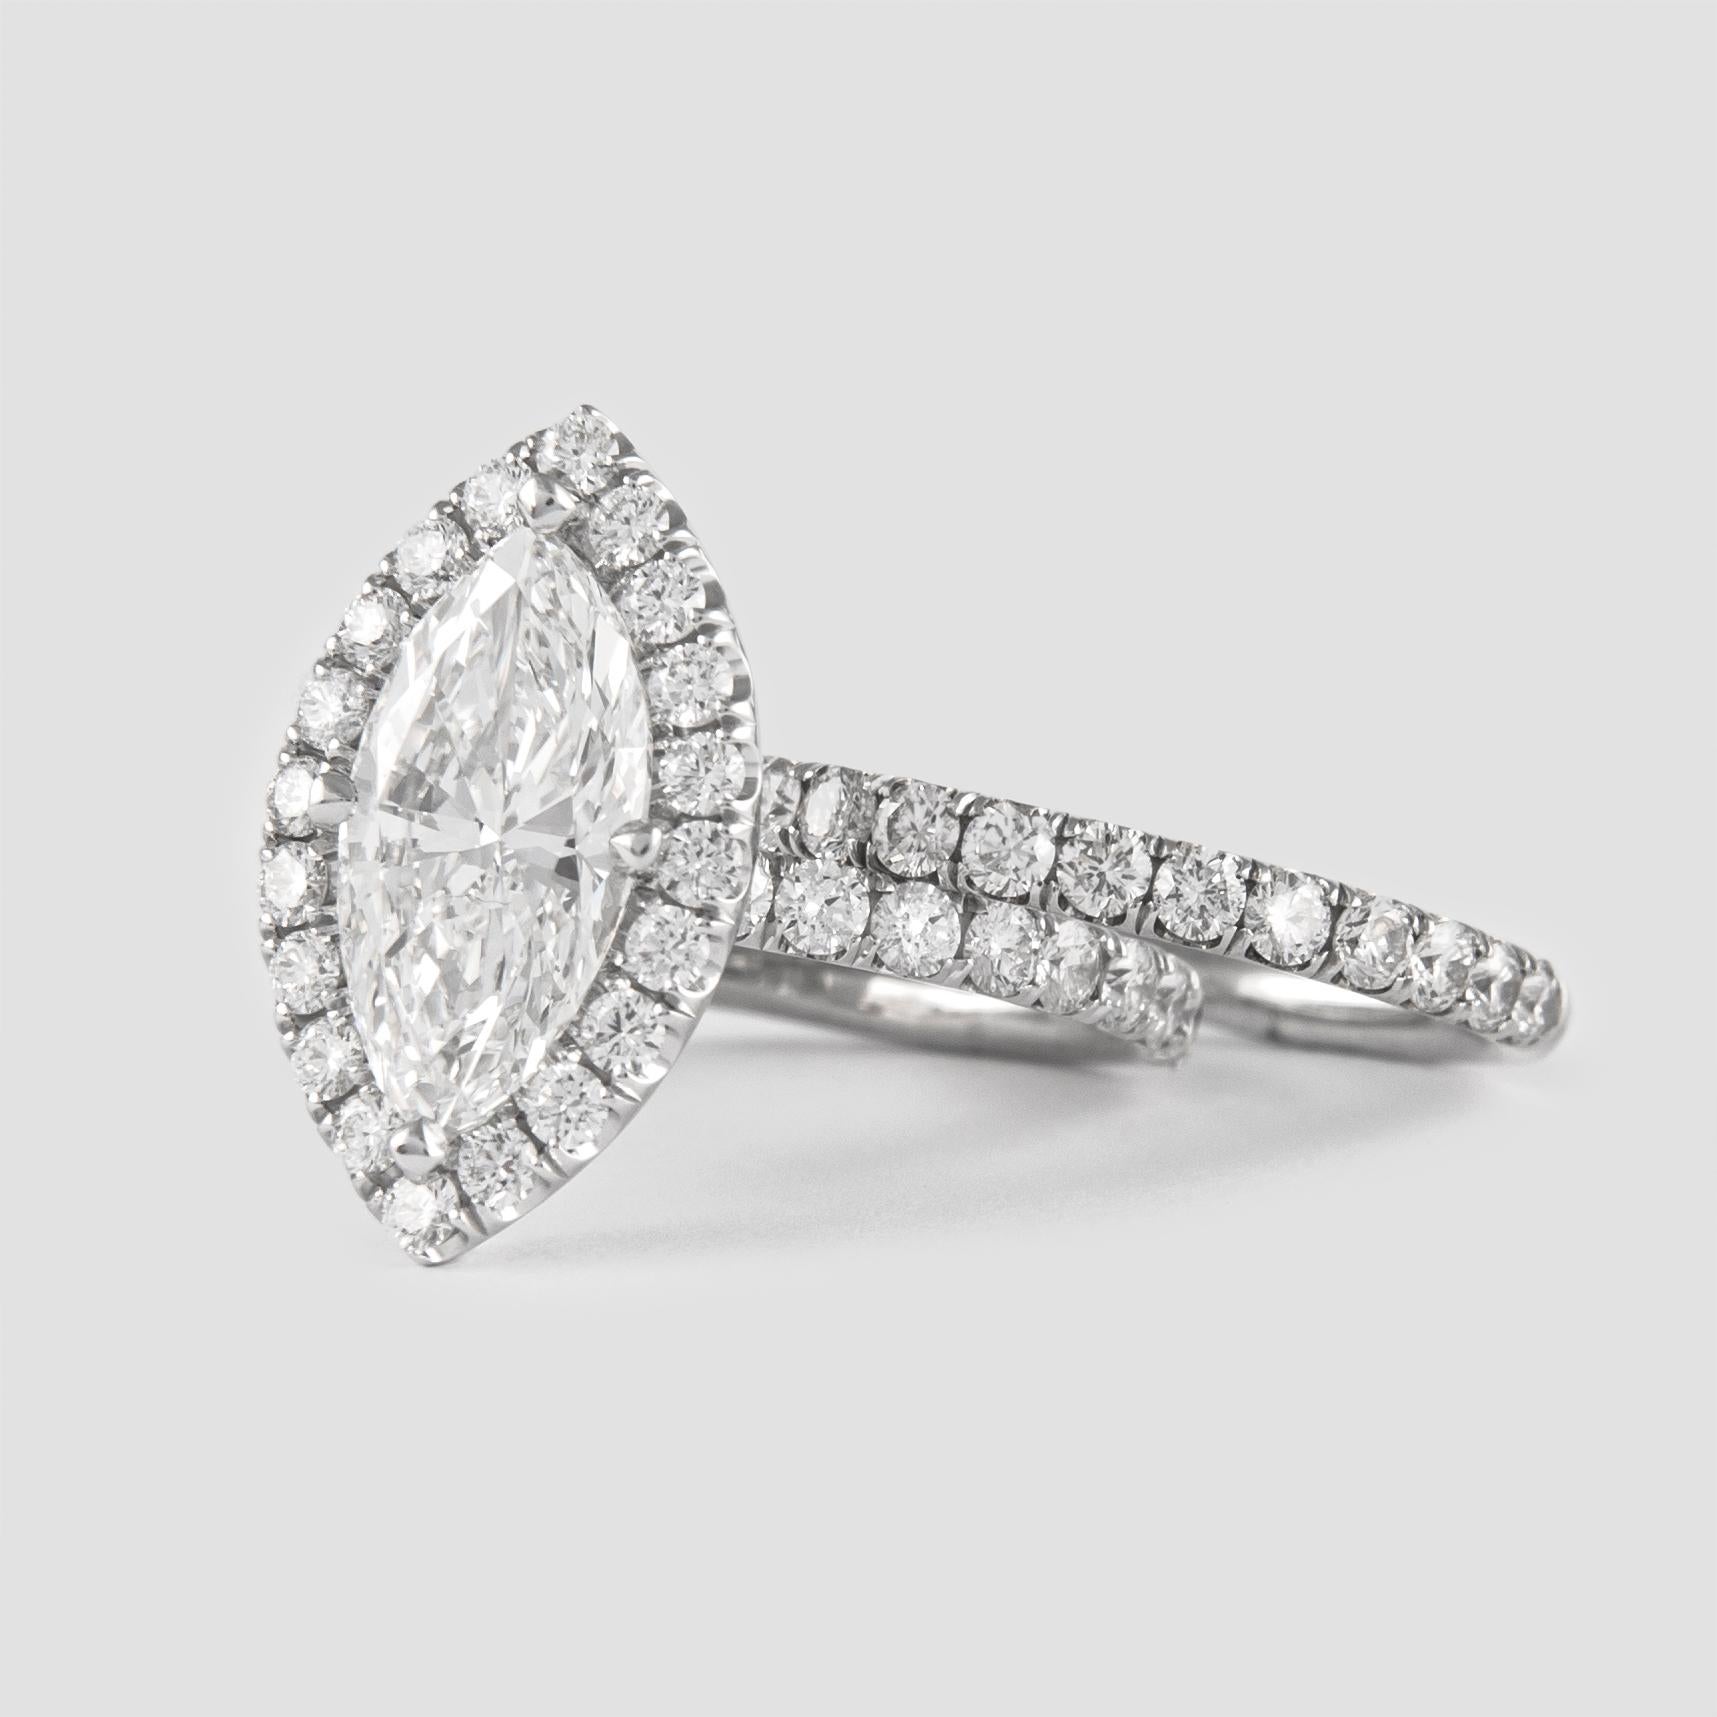 Stunning and classic diamond halo engagement ring with a half-way eternity band, EGL certified.
Center stone, 2.11ct marquise cut diamond. E color grade & VVS2 clarity grade, EGL certified. Side stones, 52 round brilliant diamonds, approximately F/G